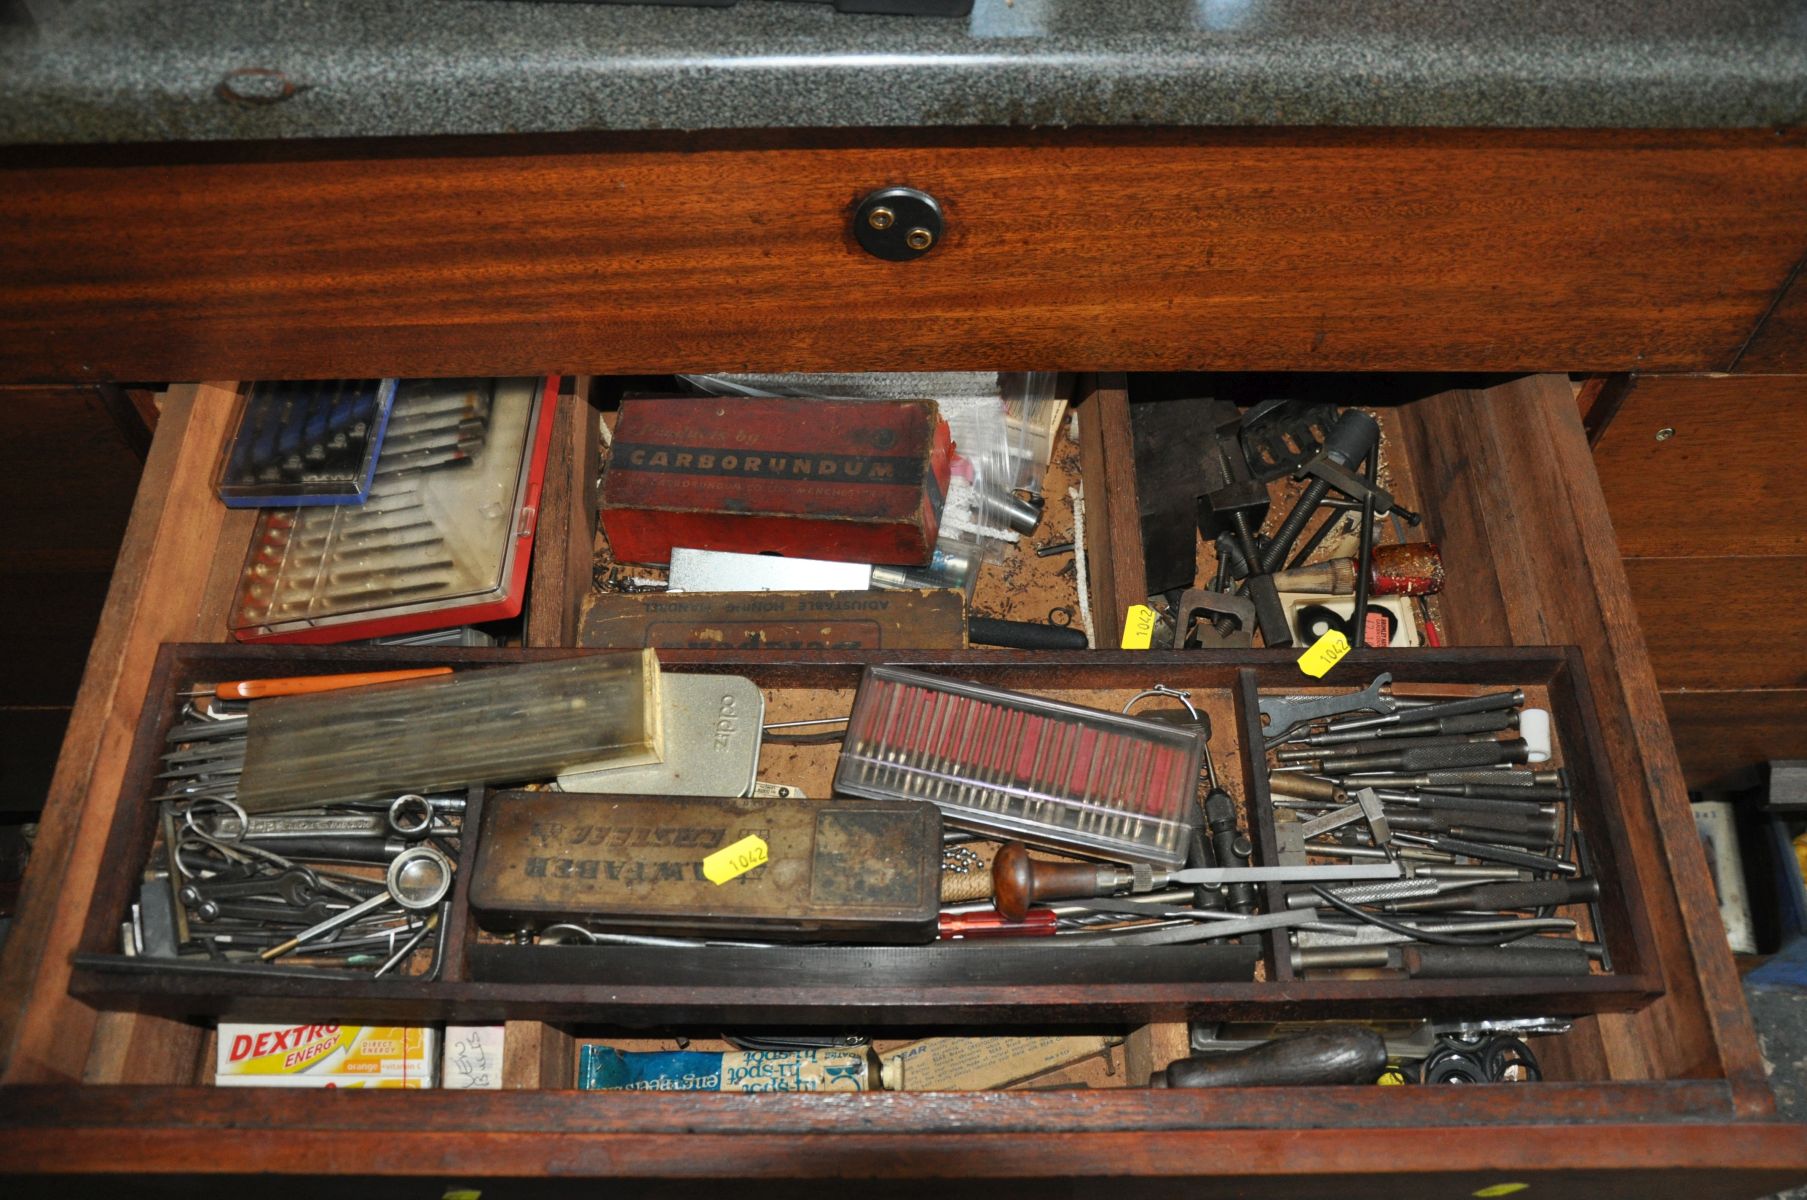 THE CONTENTS OF ONE DRAWER, containing a quantity of engineers tools including punches, drifts,